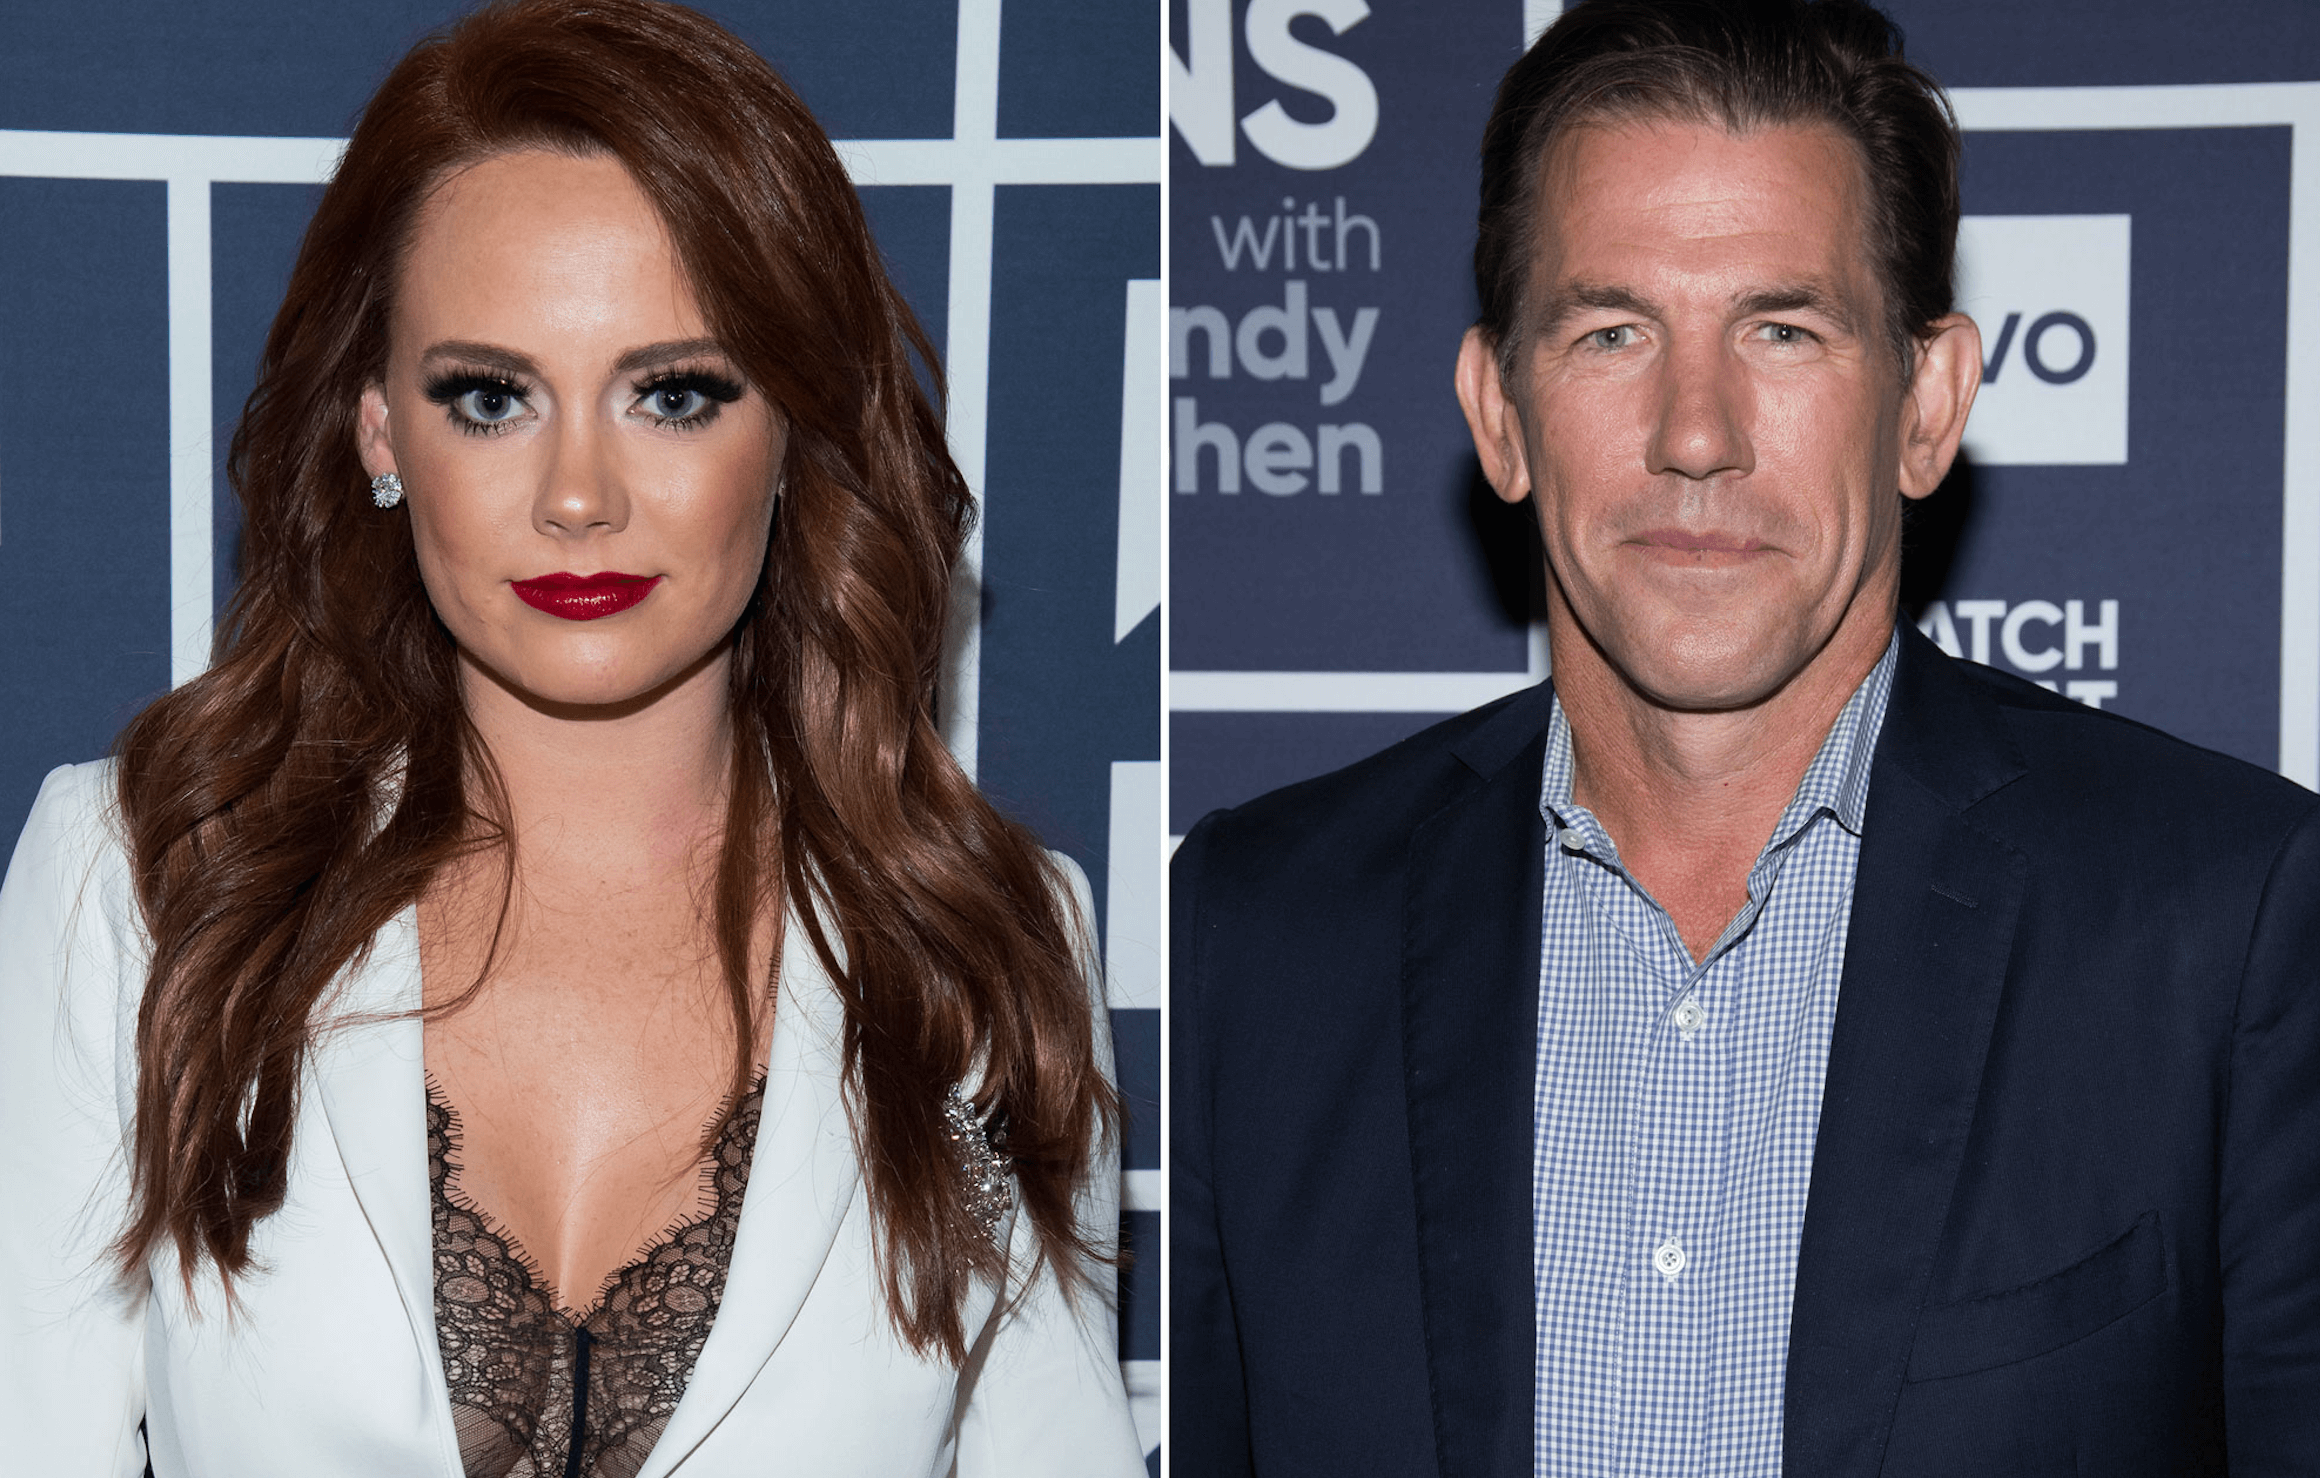 EXCLUSIVE: Thomas Ravenel Slams Kathryn Dennis’ Claims That He Blindsided Her With Baby News!